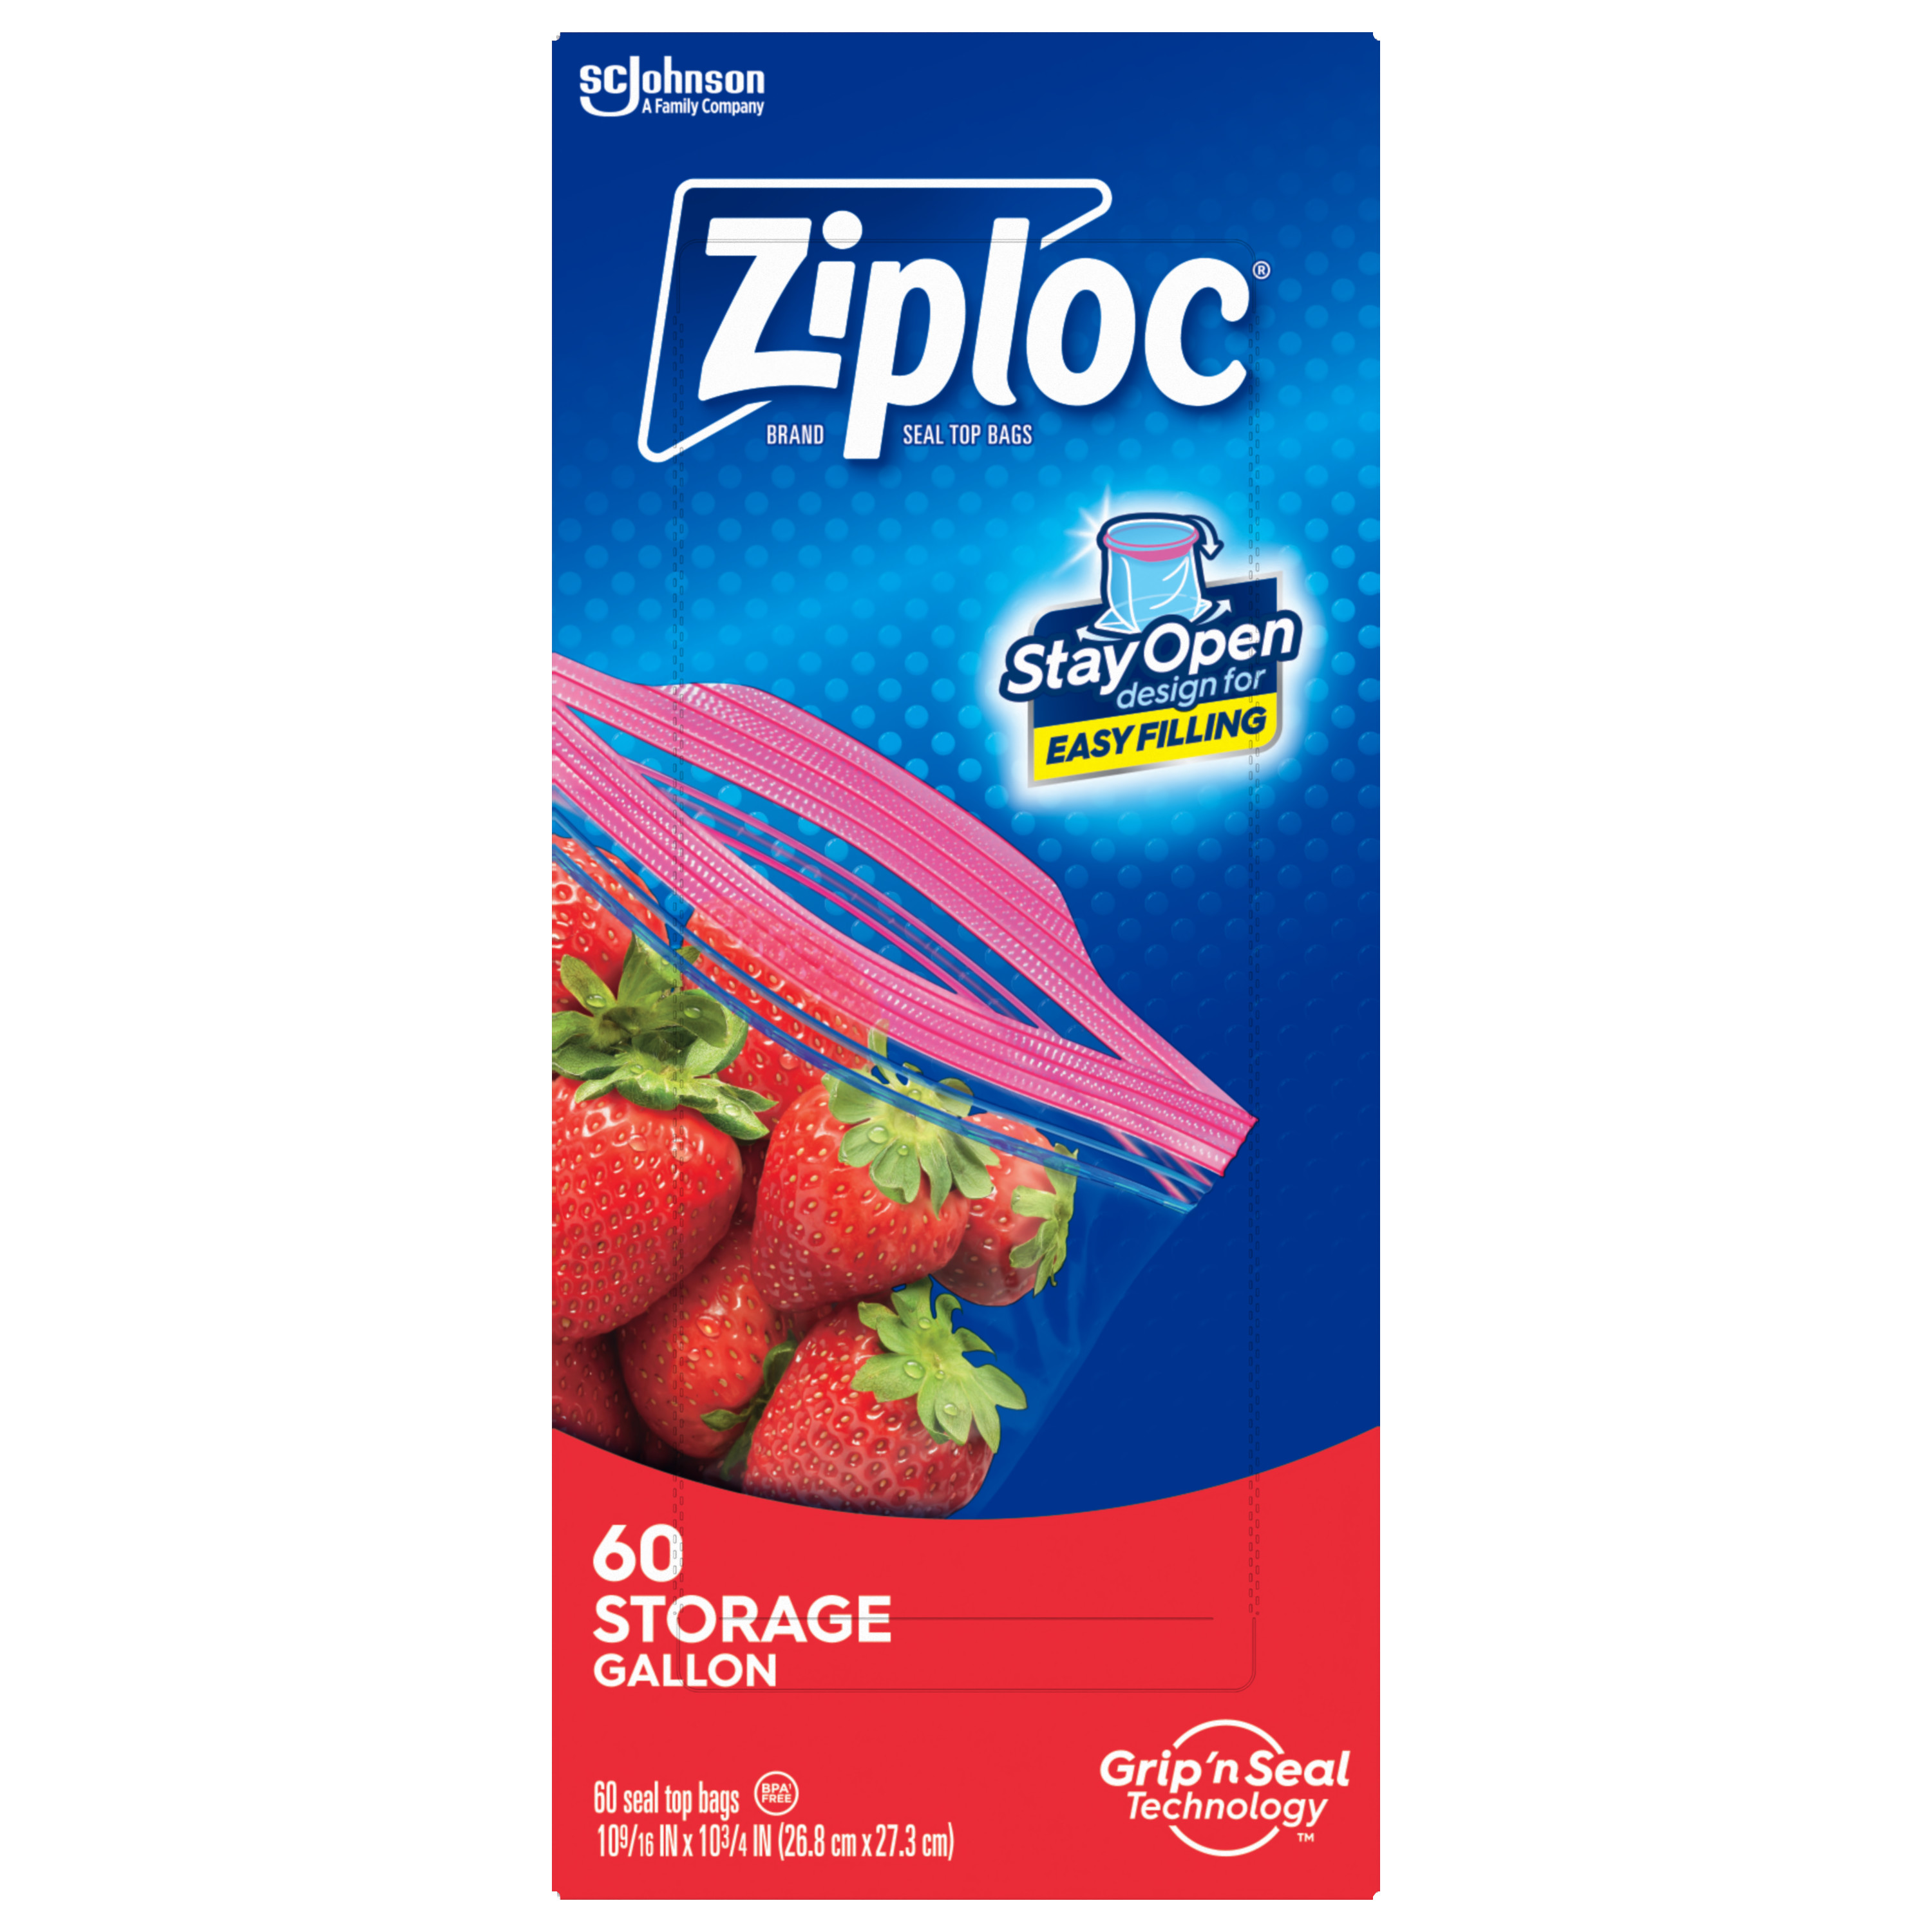 Ziploc® Brand Gallon Storage Bags with Stay Open Technology, 60 Count - image 13 of 19